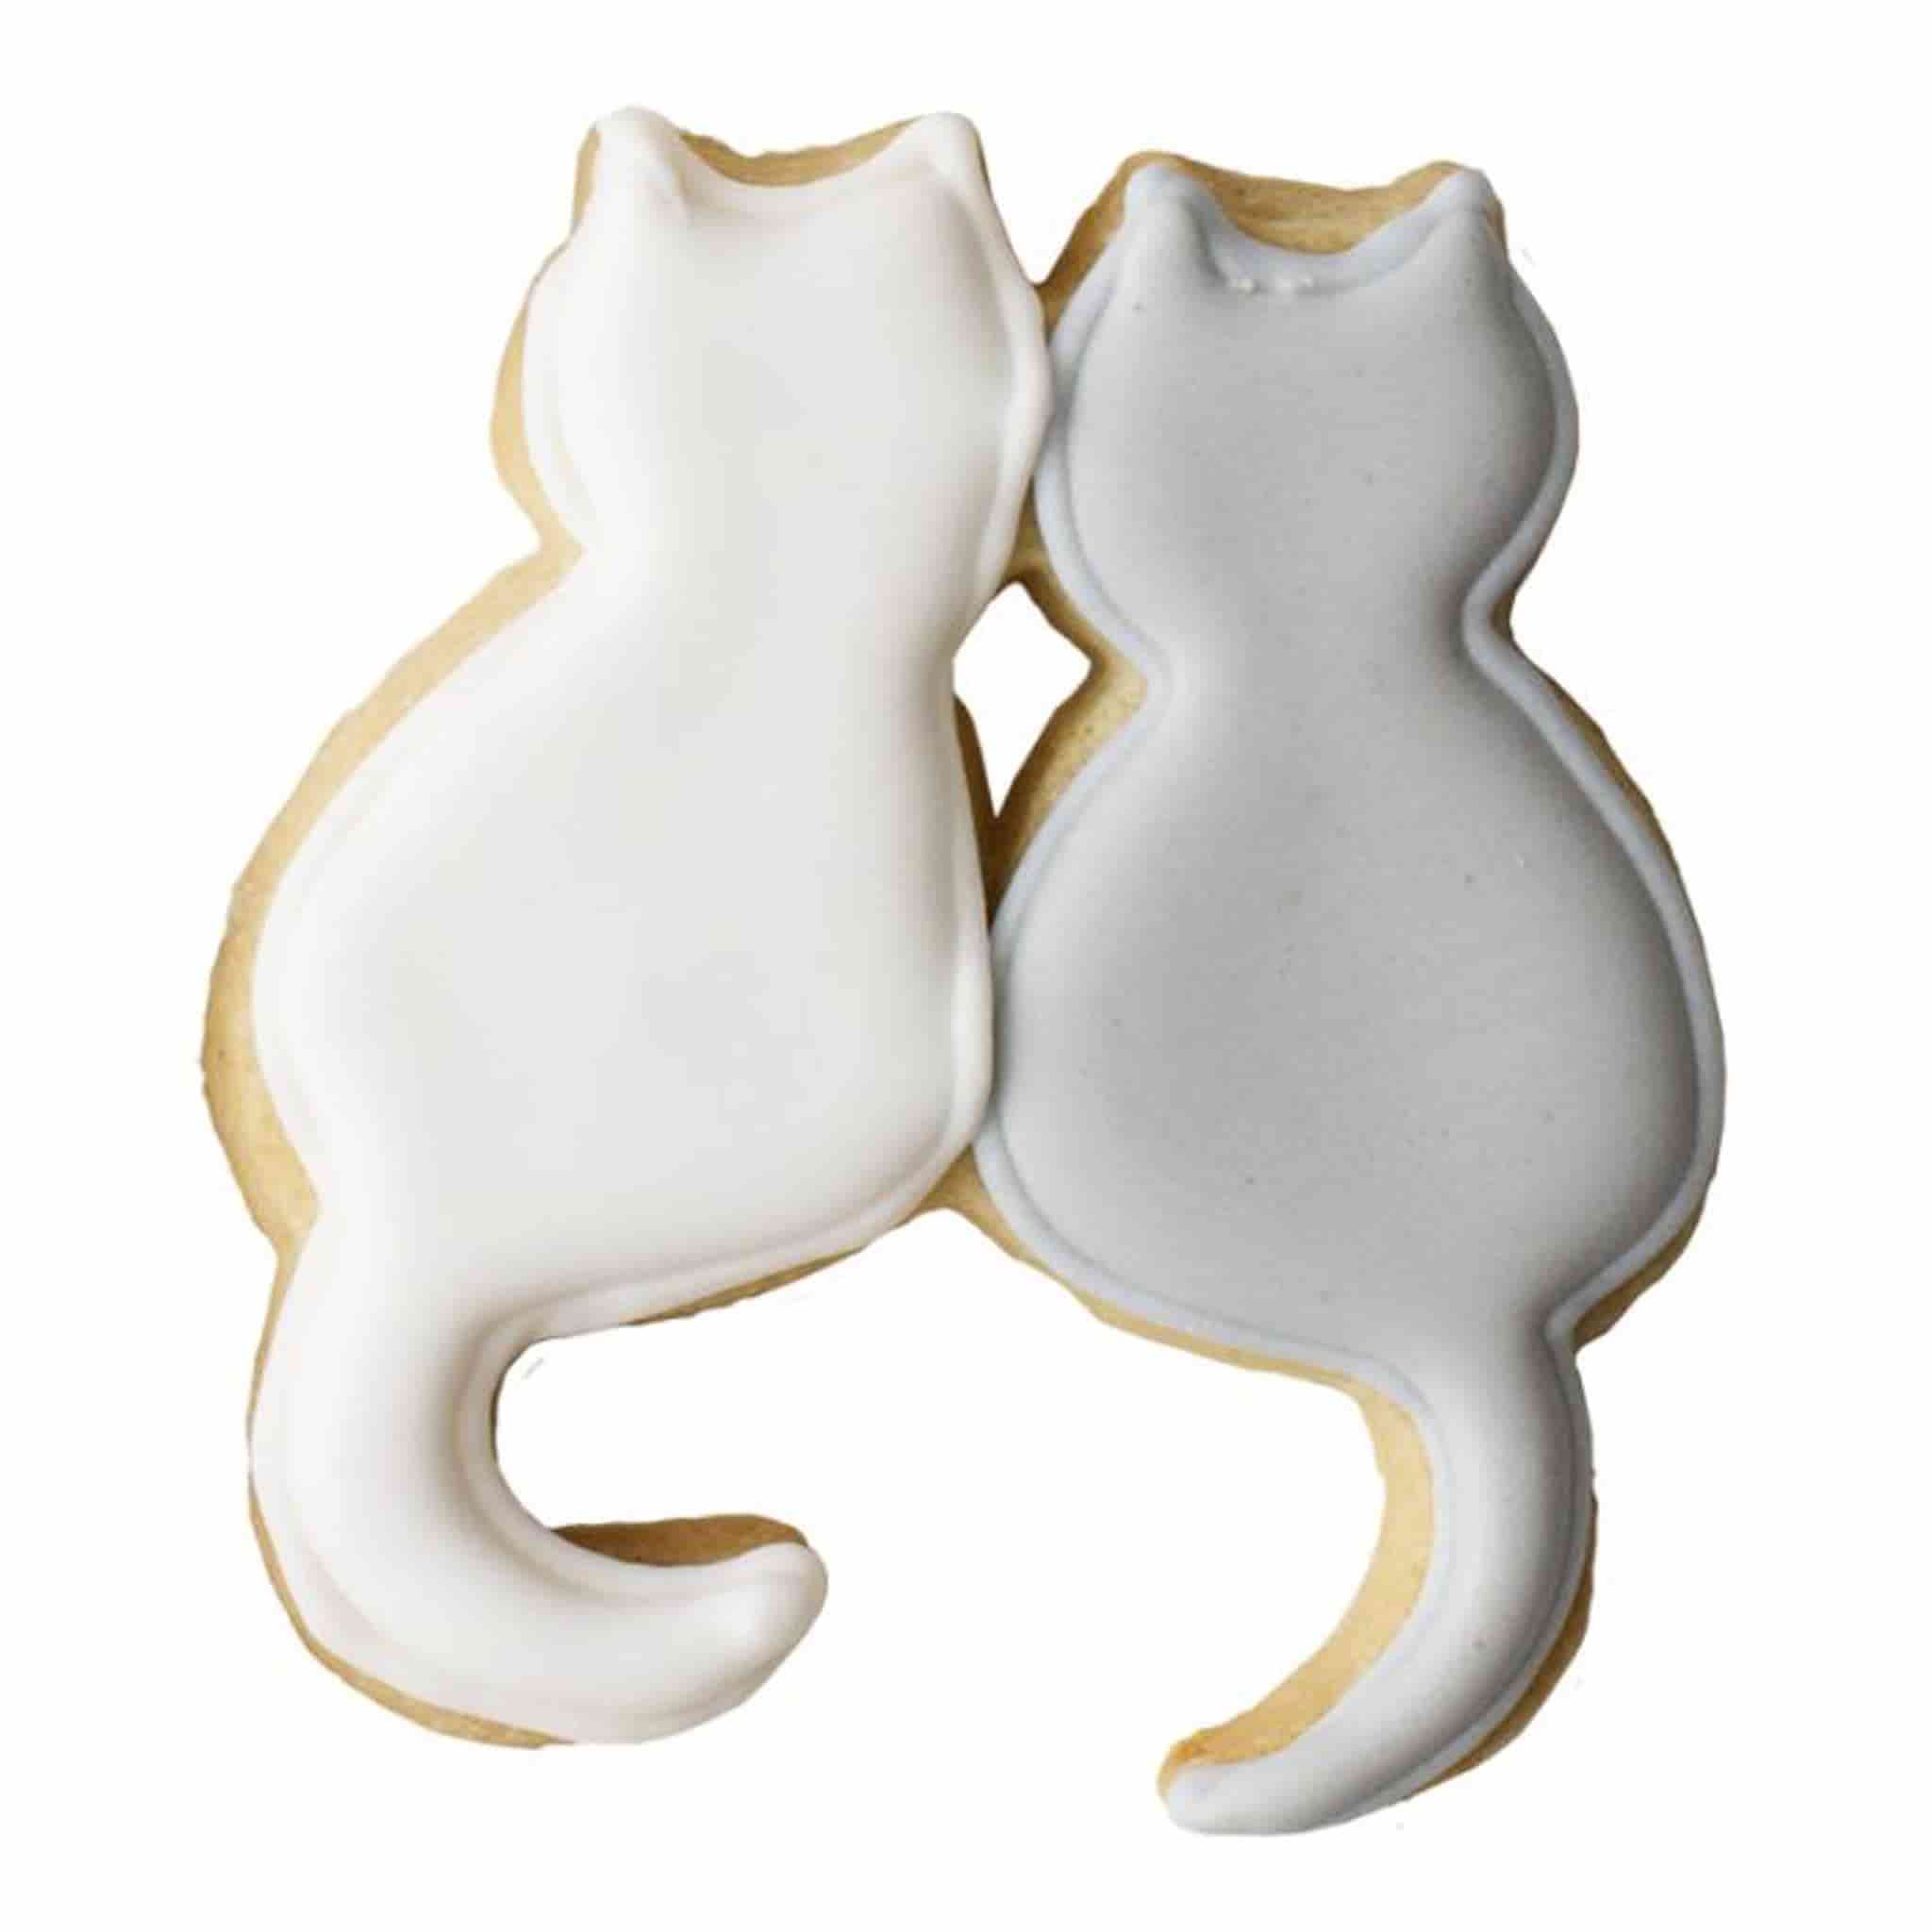 Stainless Steel Pair of Cats Cookie Cutter, 8cm